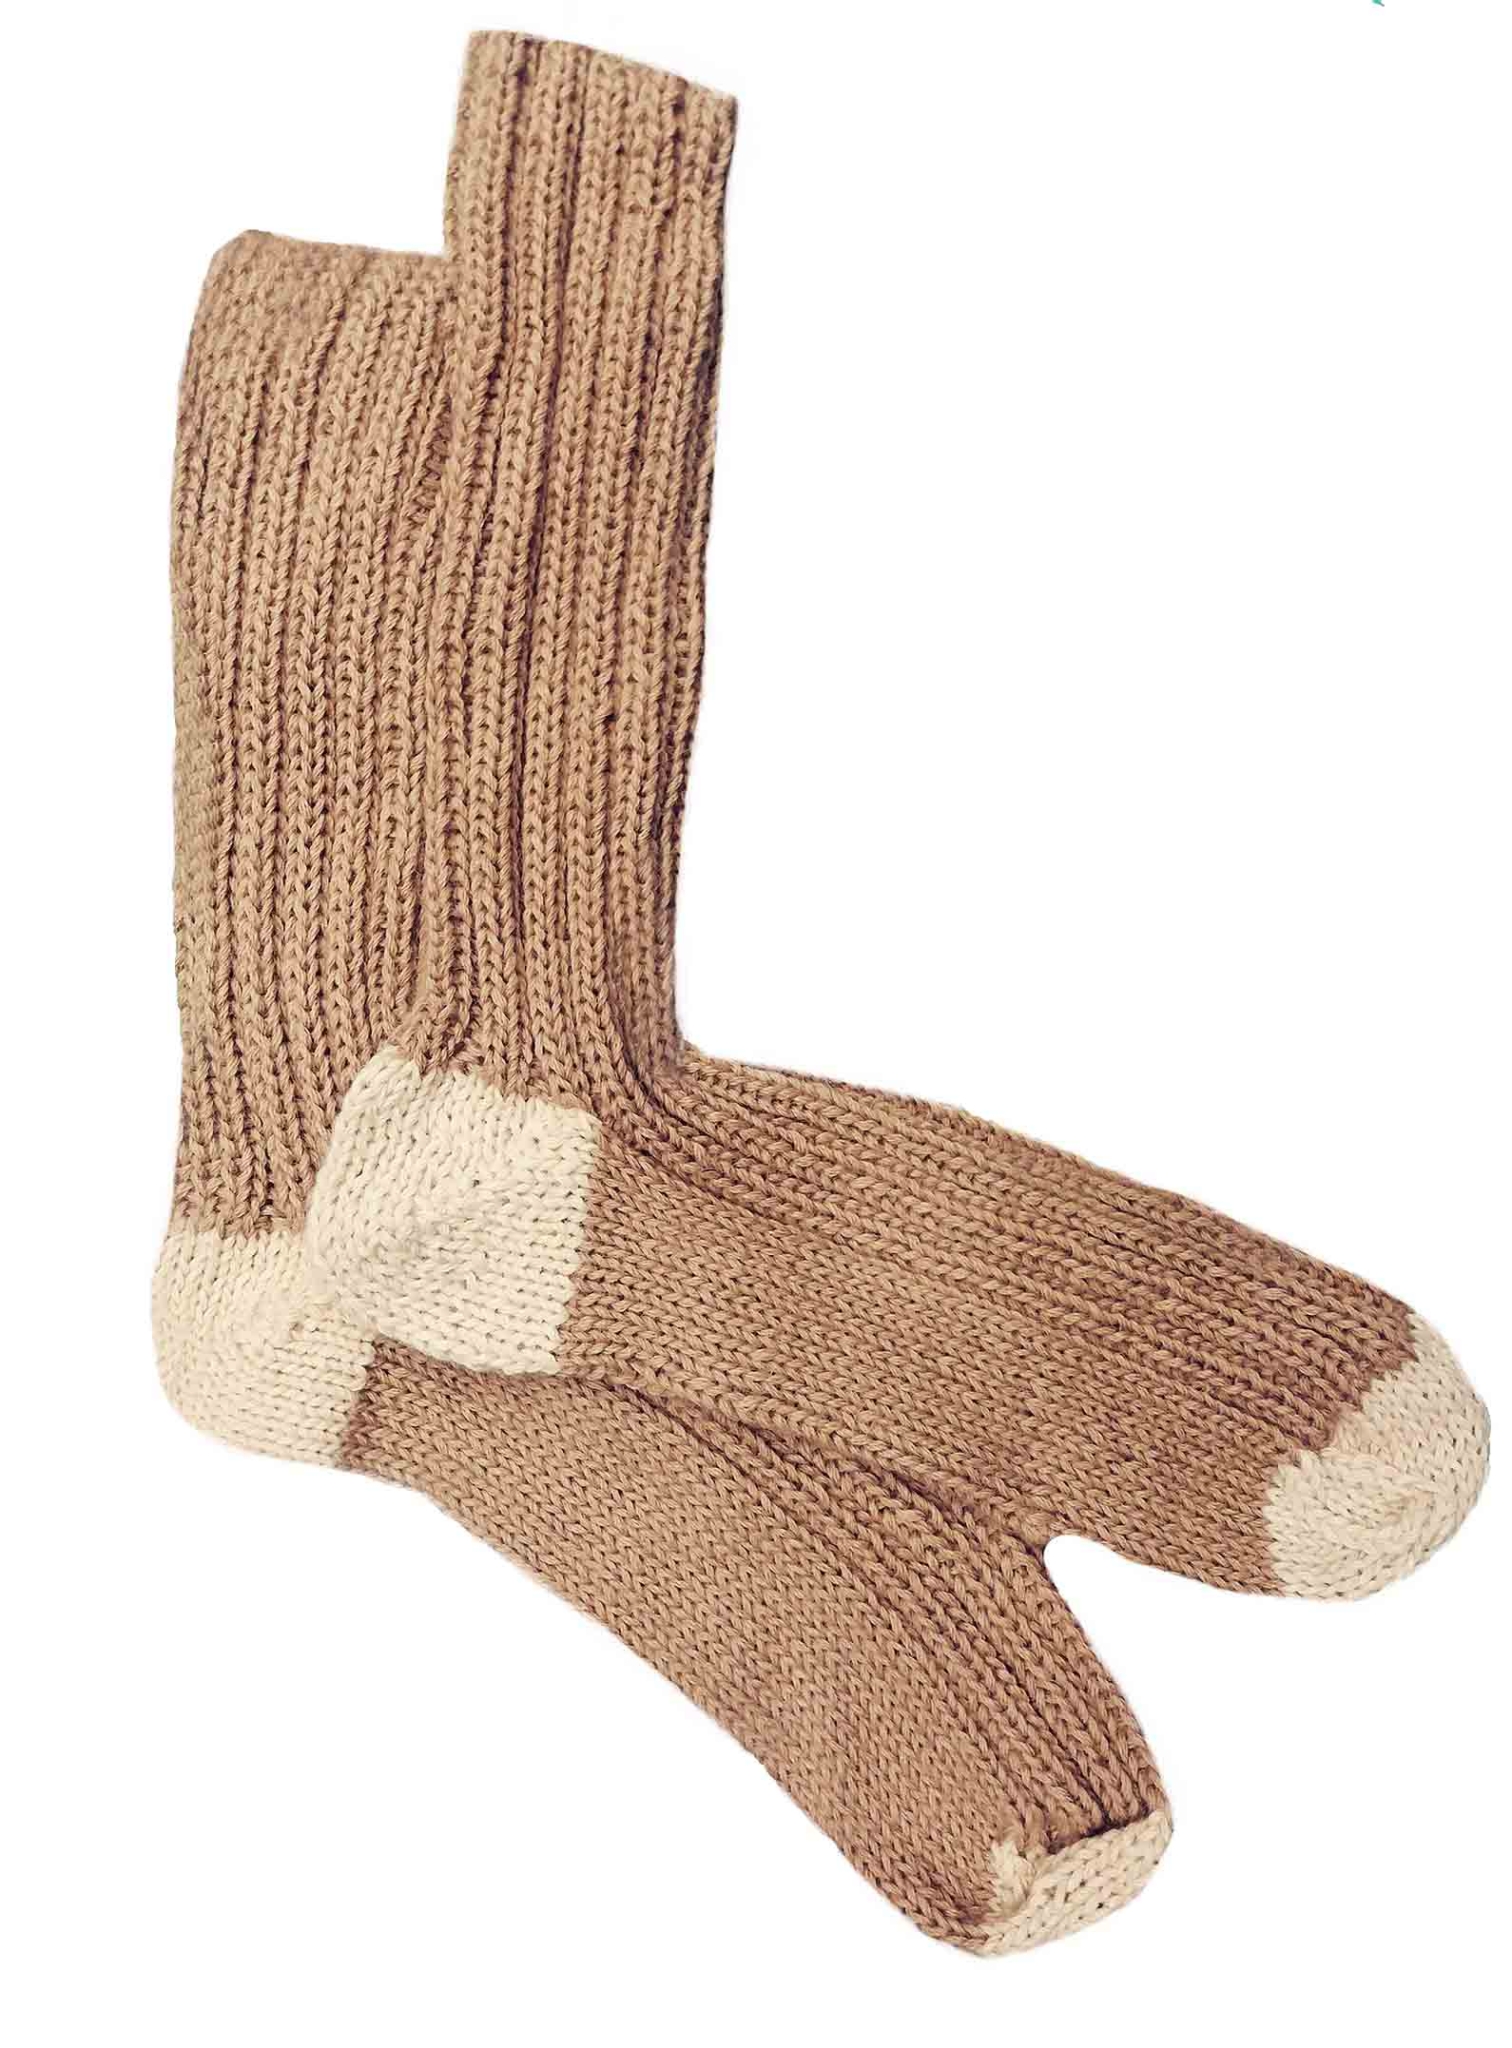 Hypoallergenic 100% Royal Alpaca Handknitted Socks, Natural Colours ...